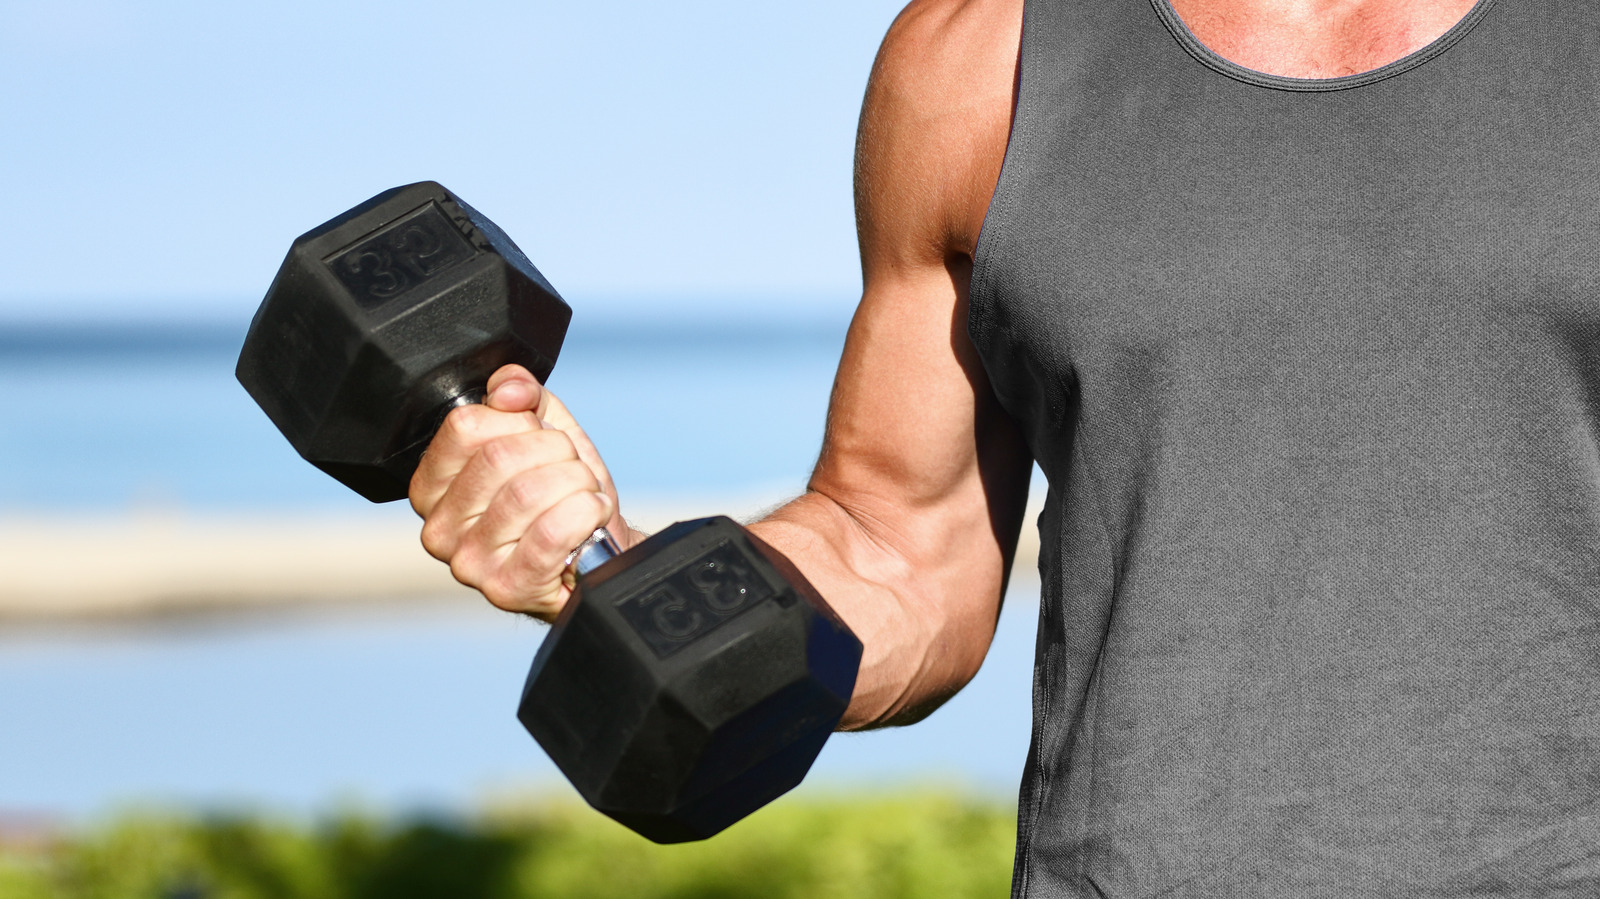 Can't Straighten Your Arms After a Workout? Here's What to Do